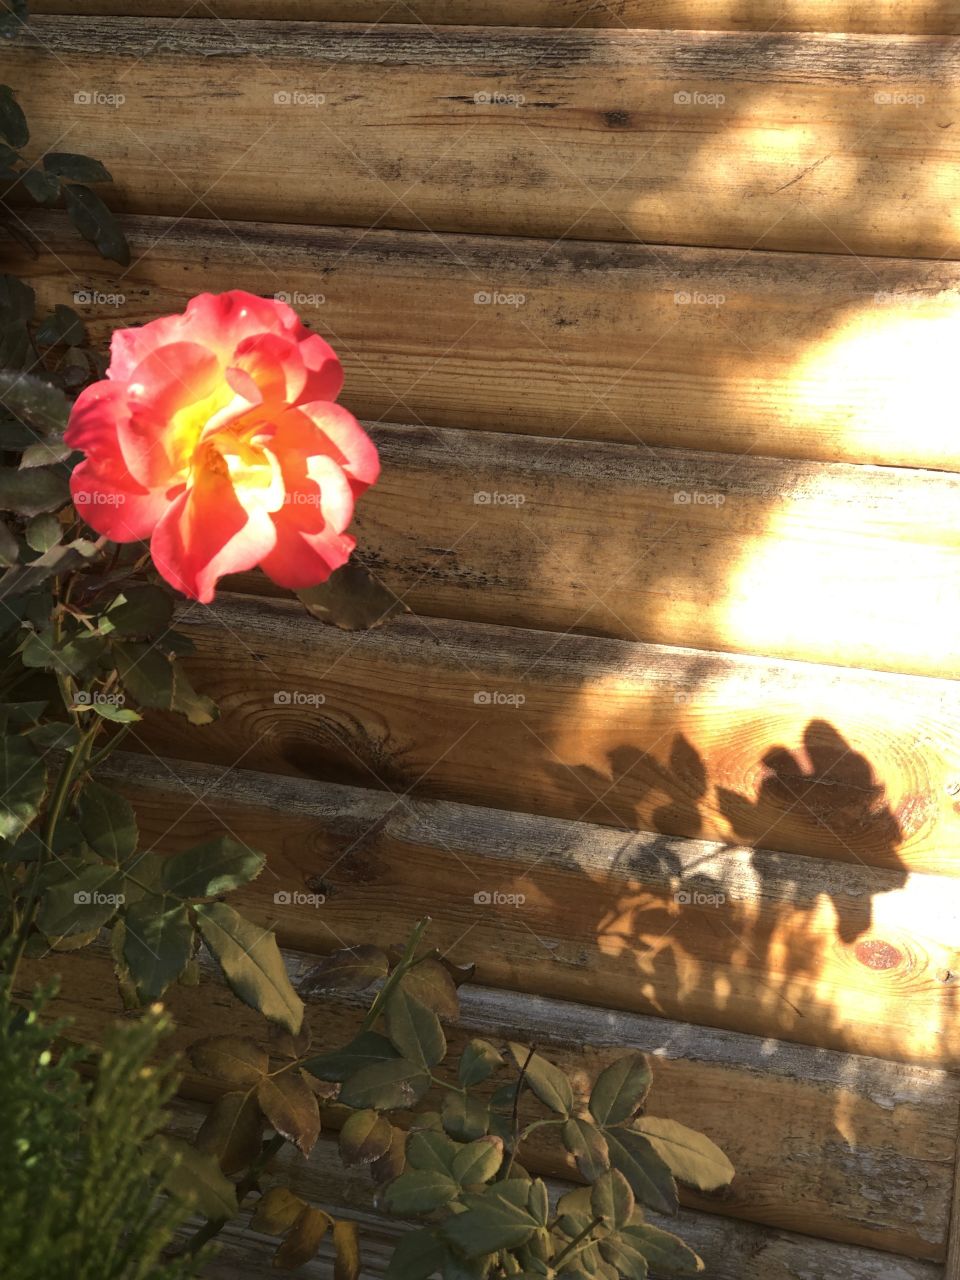 Roses bloom in January 